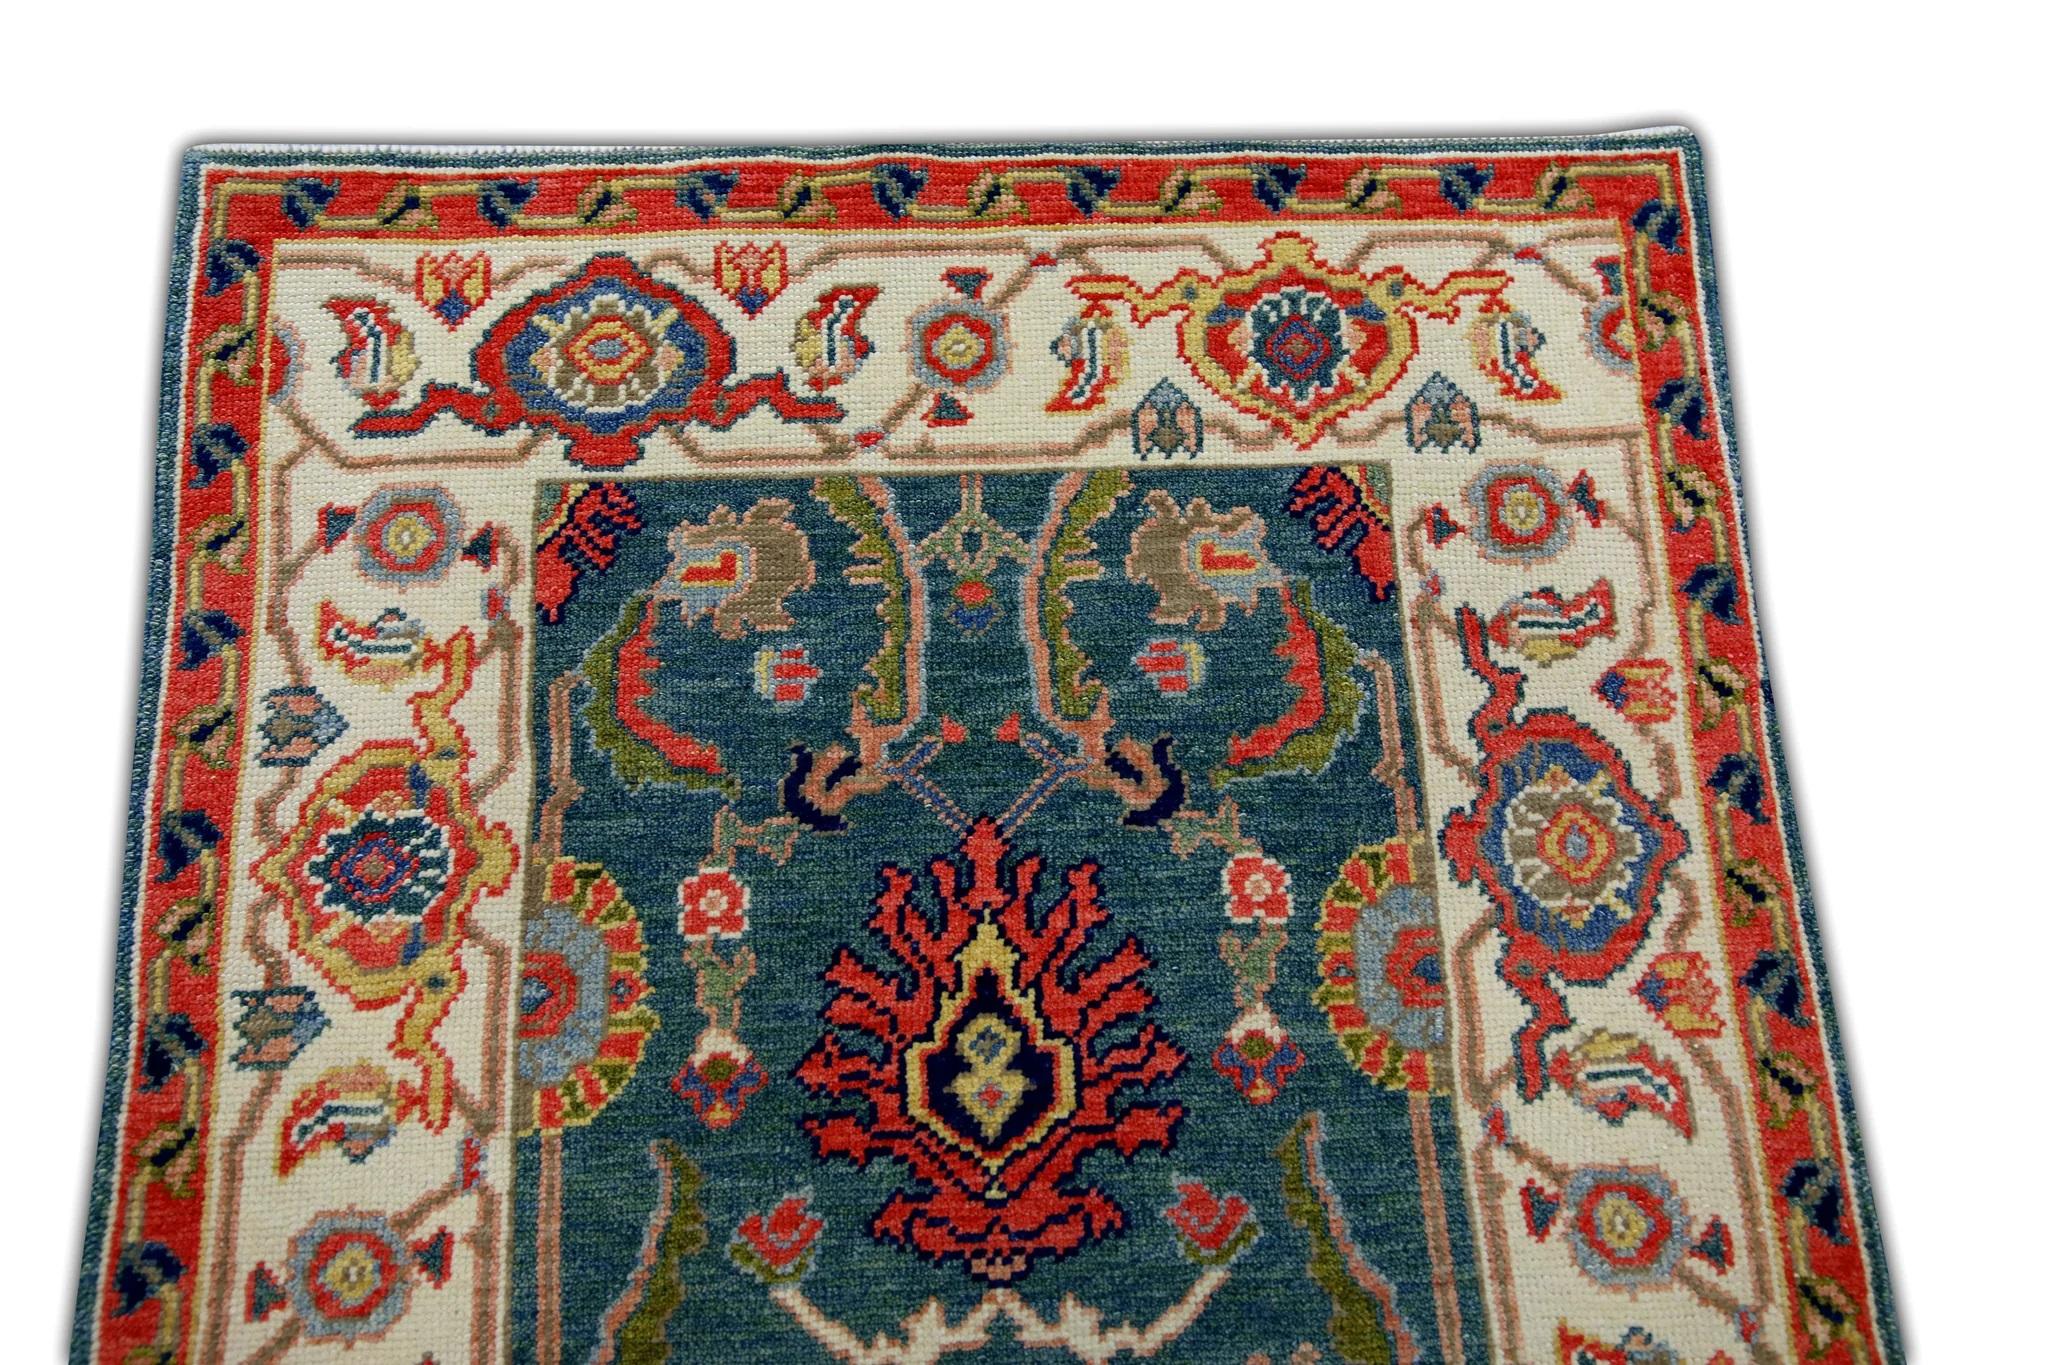 Cream, Green, and Red Floral Turkish Finewoven Wool Oushak Rug 2'7